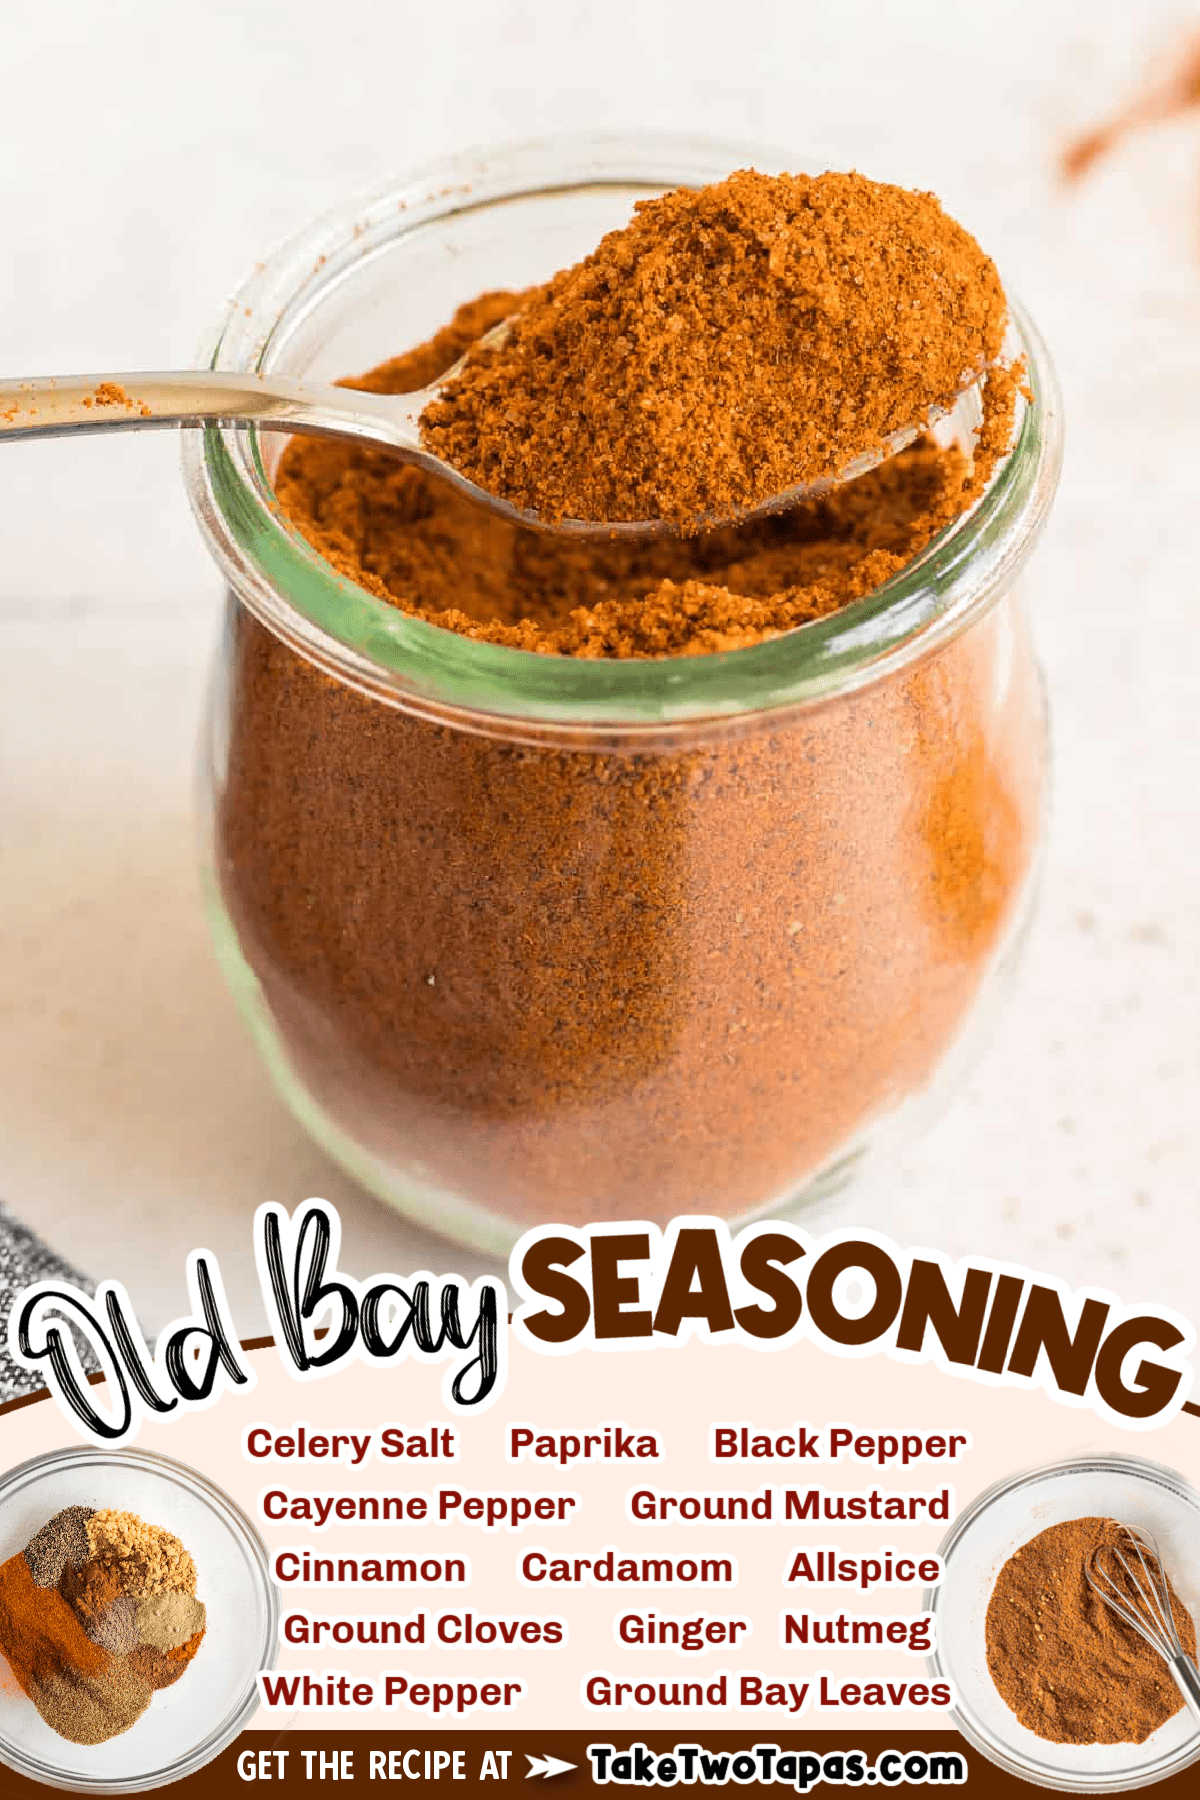 5 Best Substitutes for Old Bay Seasoning - Clean Eating Kitchen